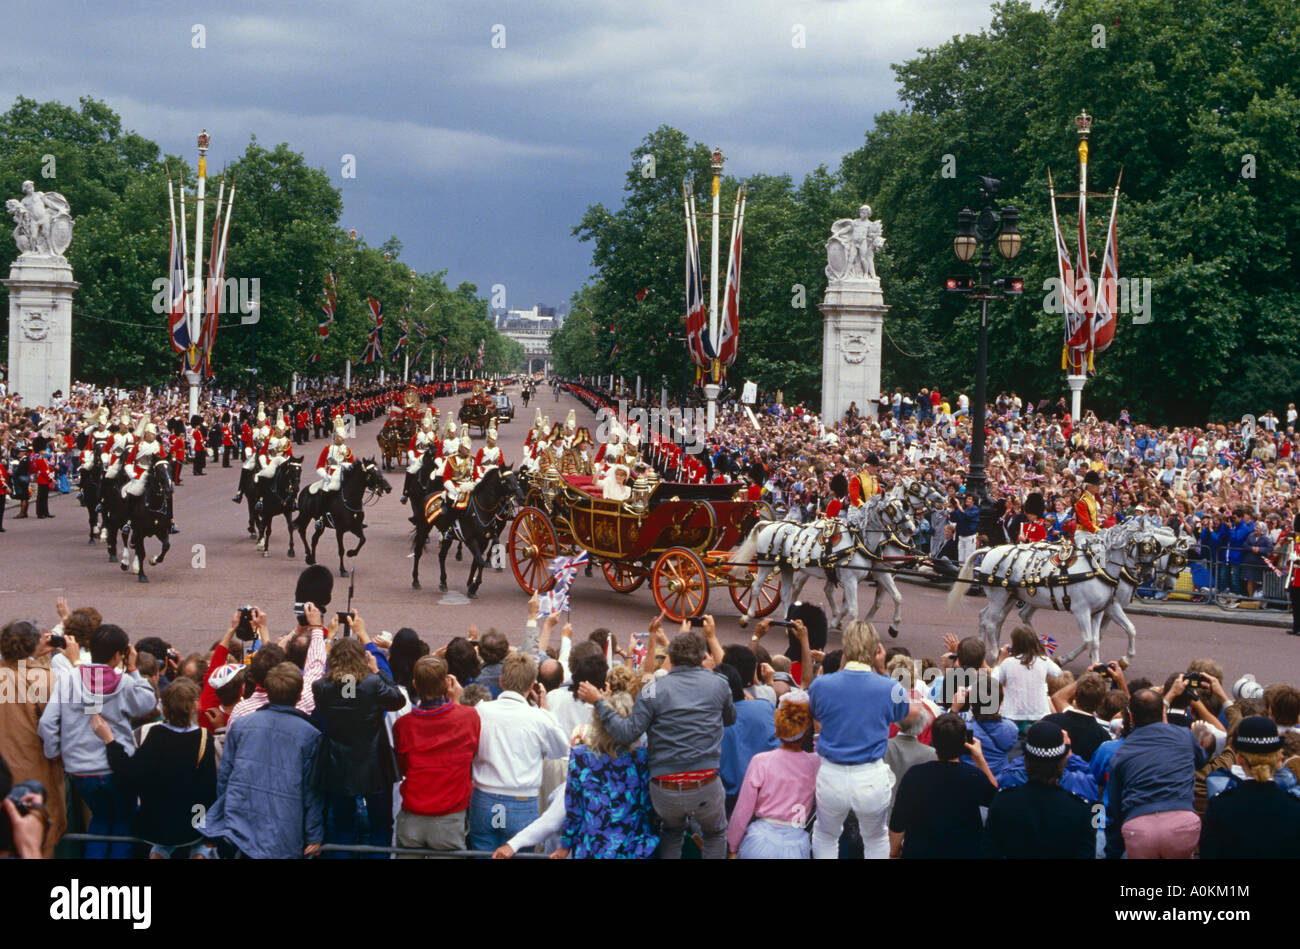 The wedding of Prince Andrew to Sarah, Duchess of York. Carriage in The Mall, London Stock Photo